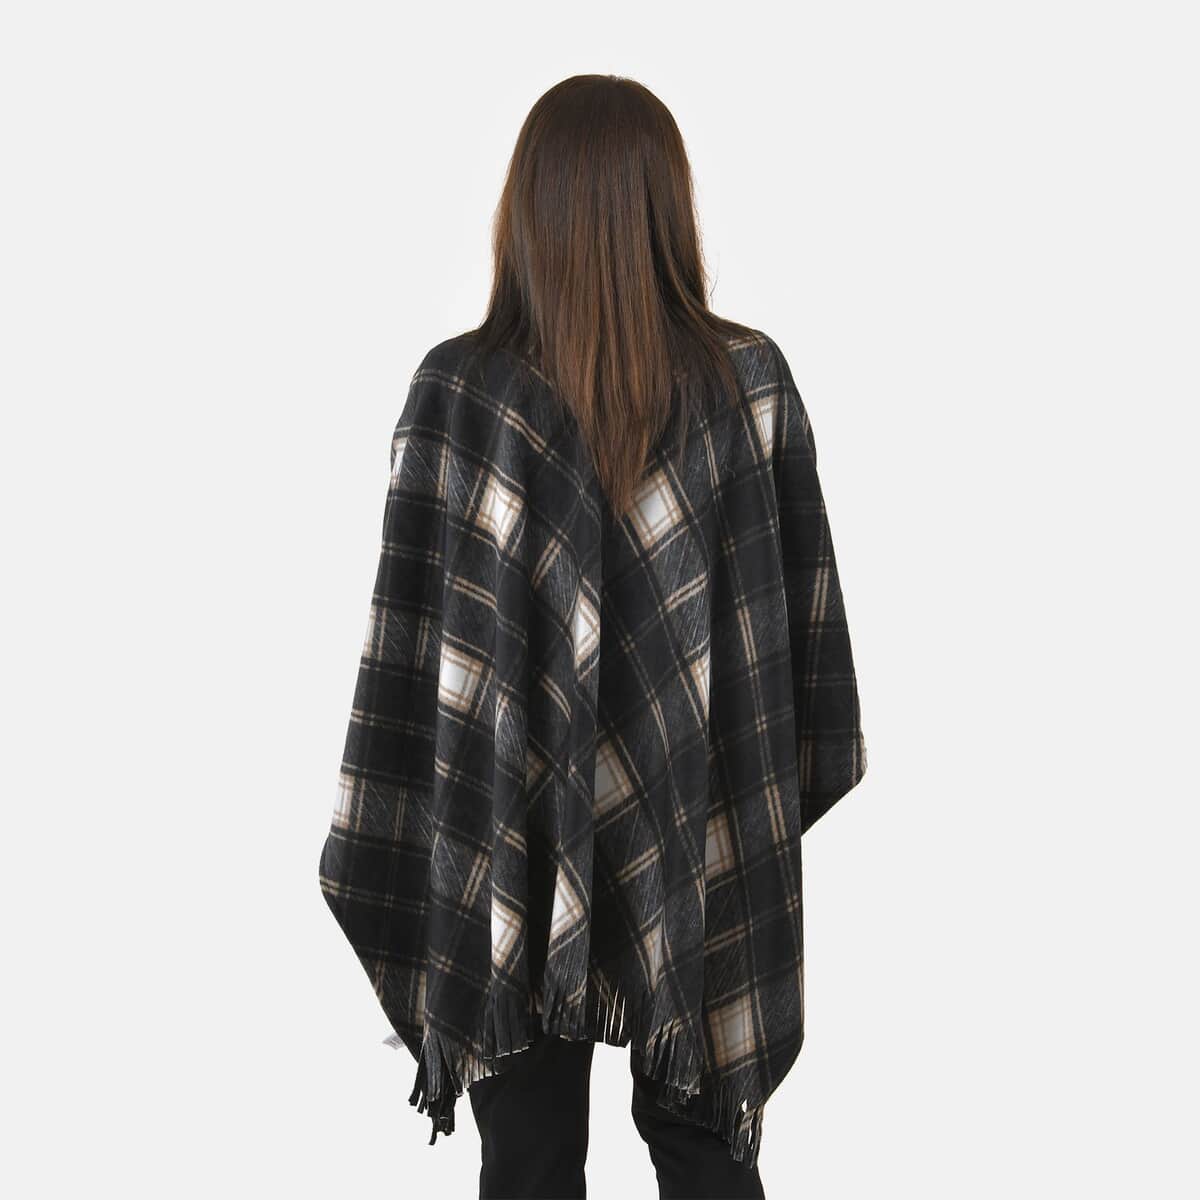 TAMSY Large Neutral Plaid Pattern Double Knit Poncho with Fringe (48"X 28.3") image number 1